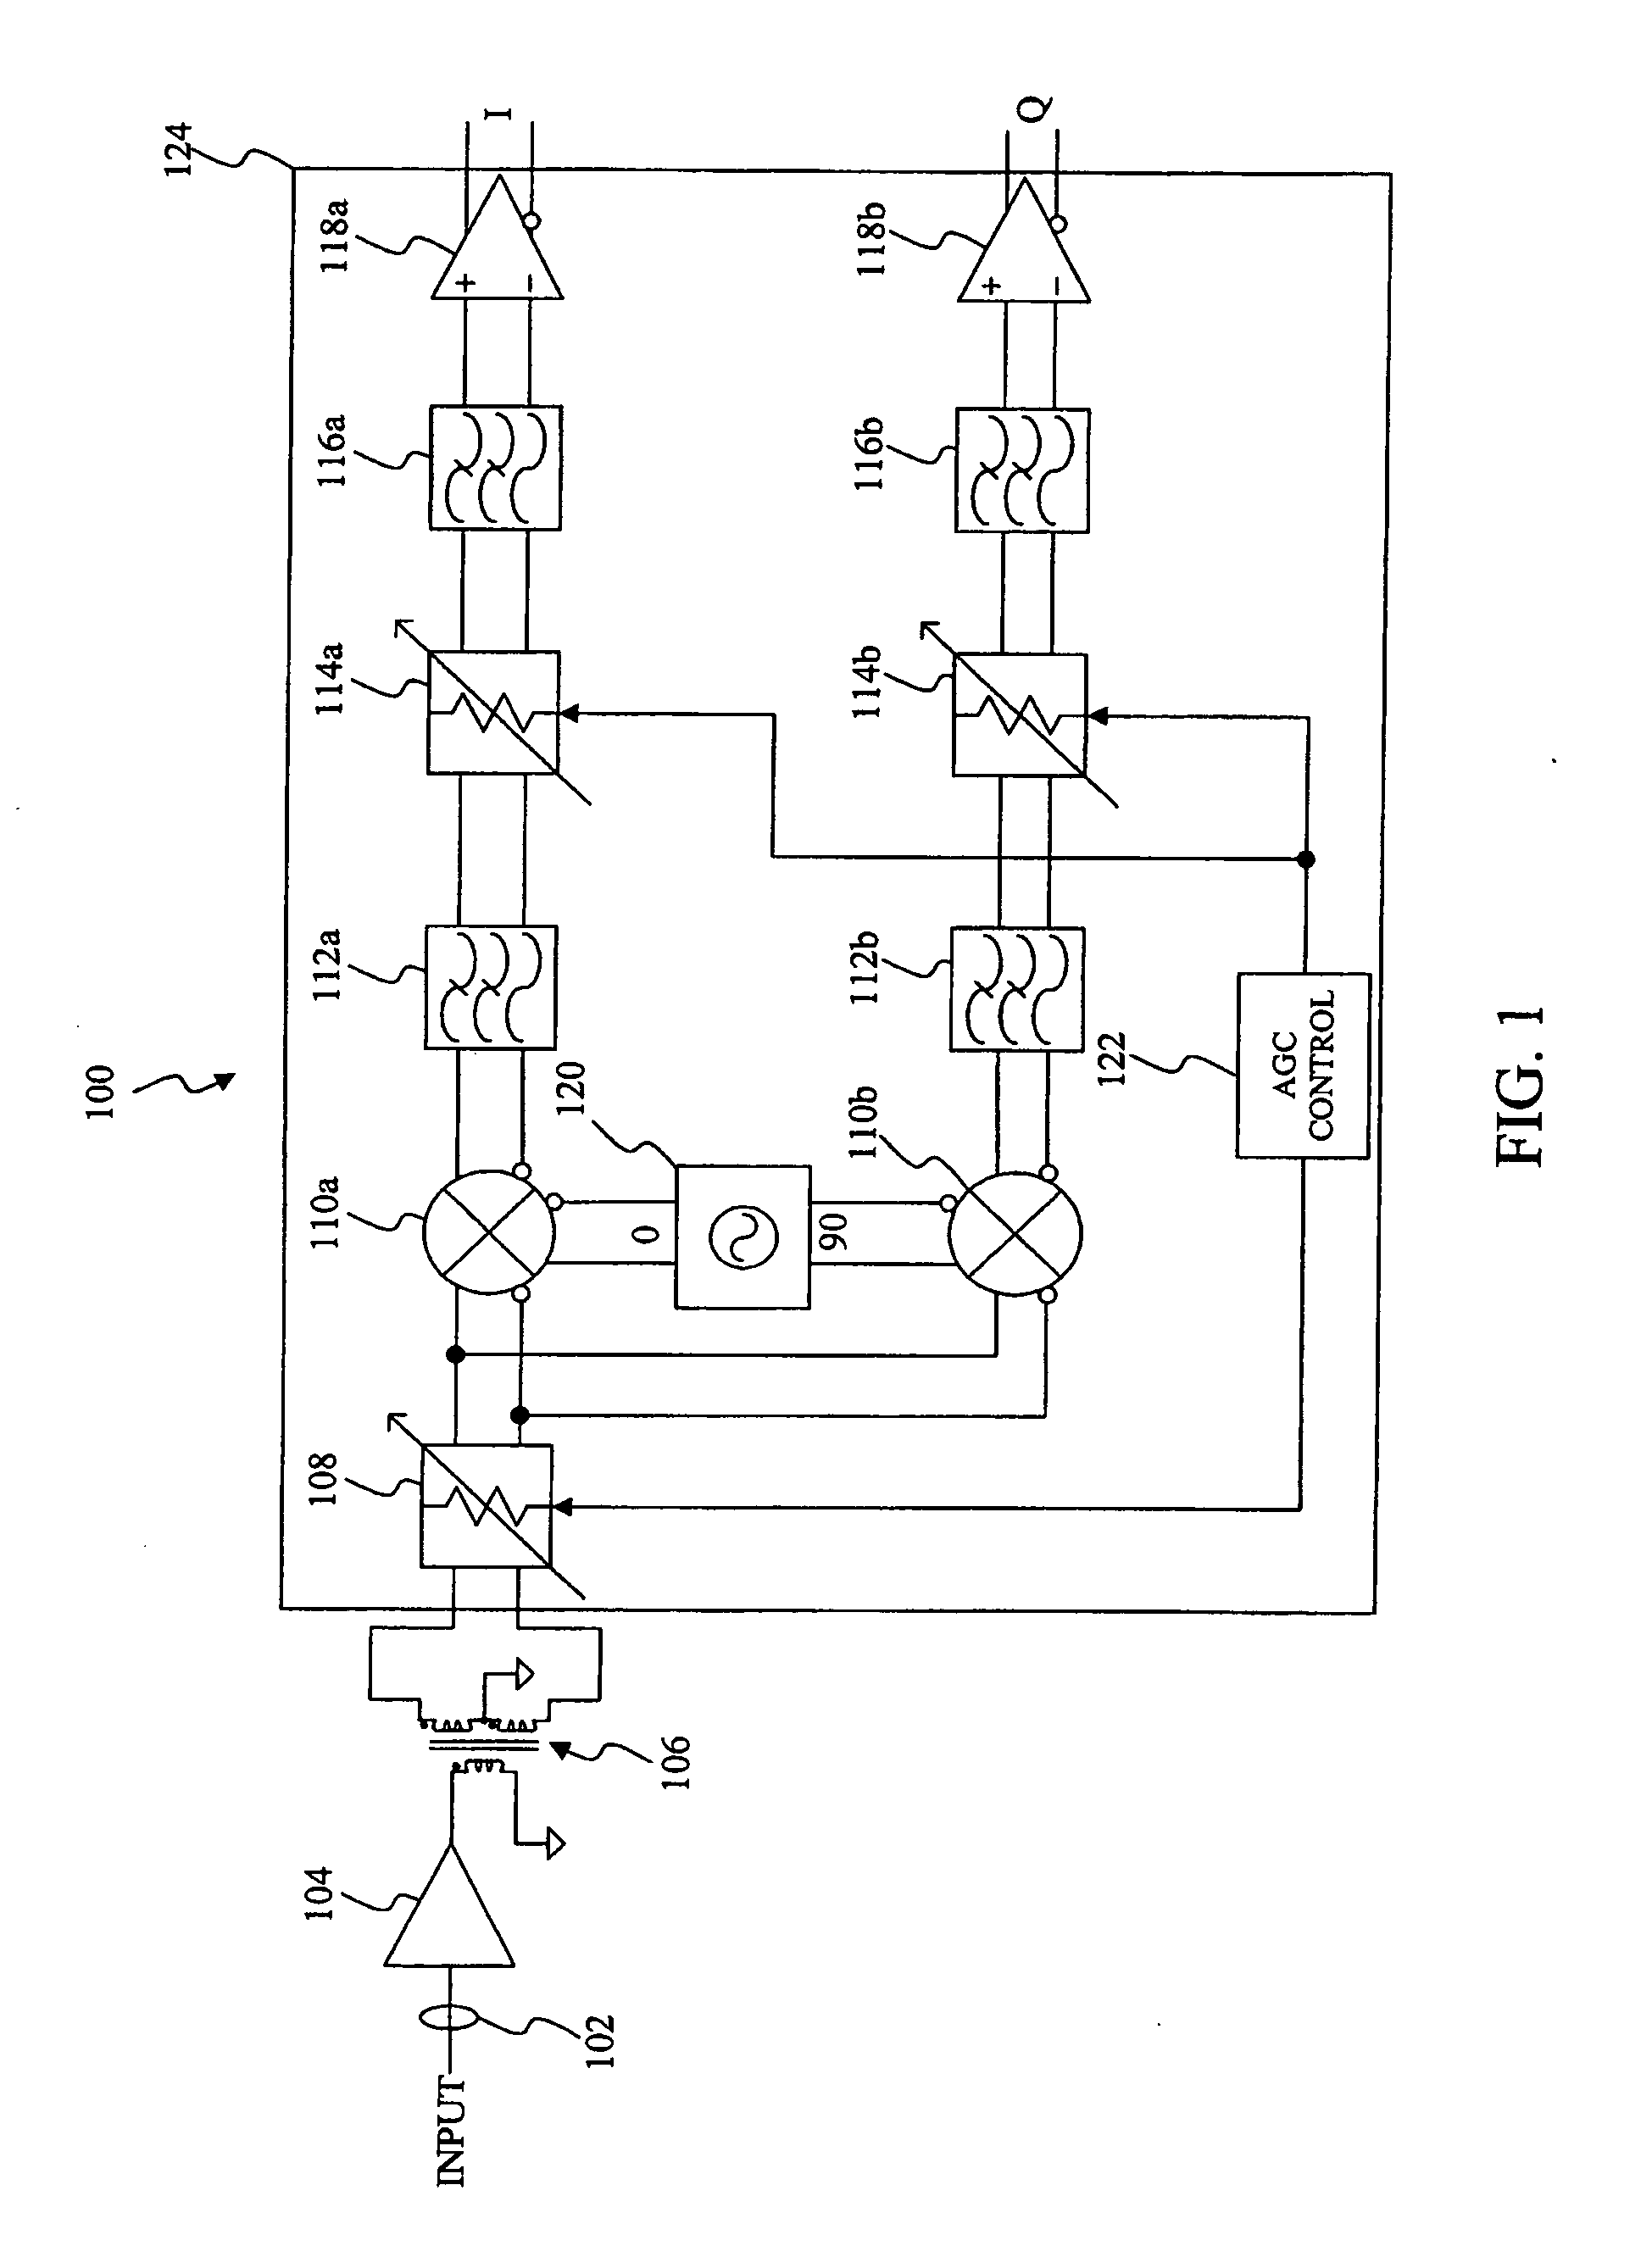 Programmable attenuator using digitally controlled CMOS switches